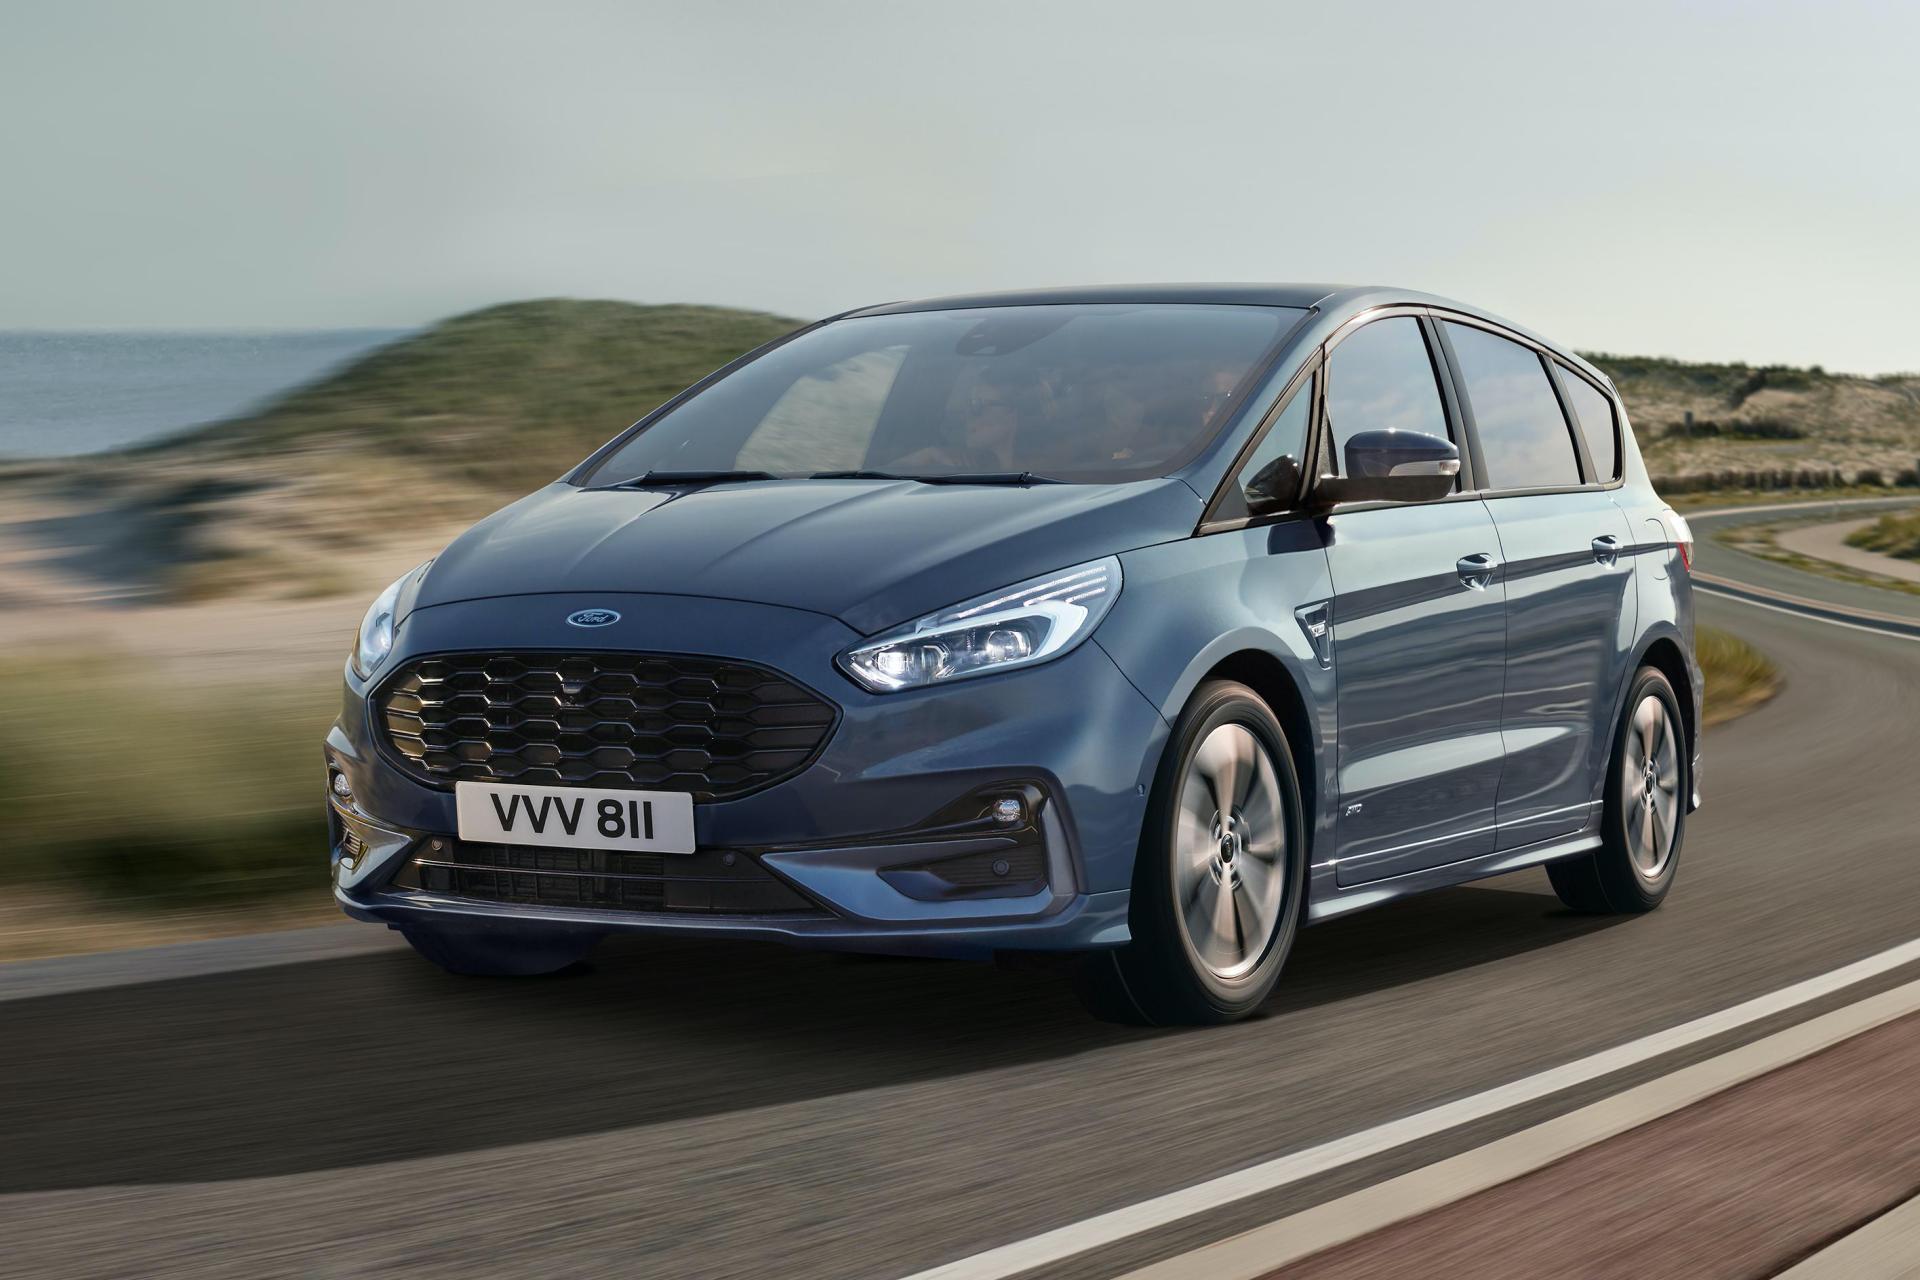 https://www.carscoops.com/wp-content/uploads/2020/01/2019-Ford-S-Max.jpg